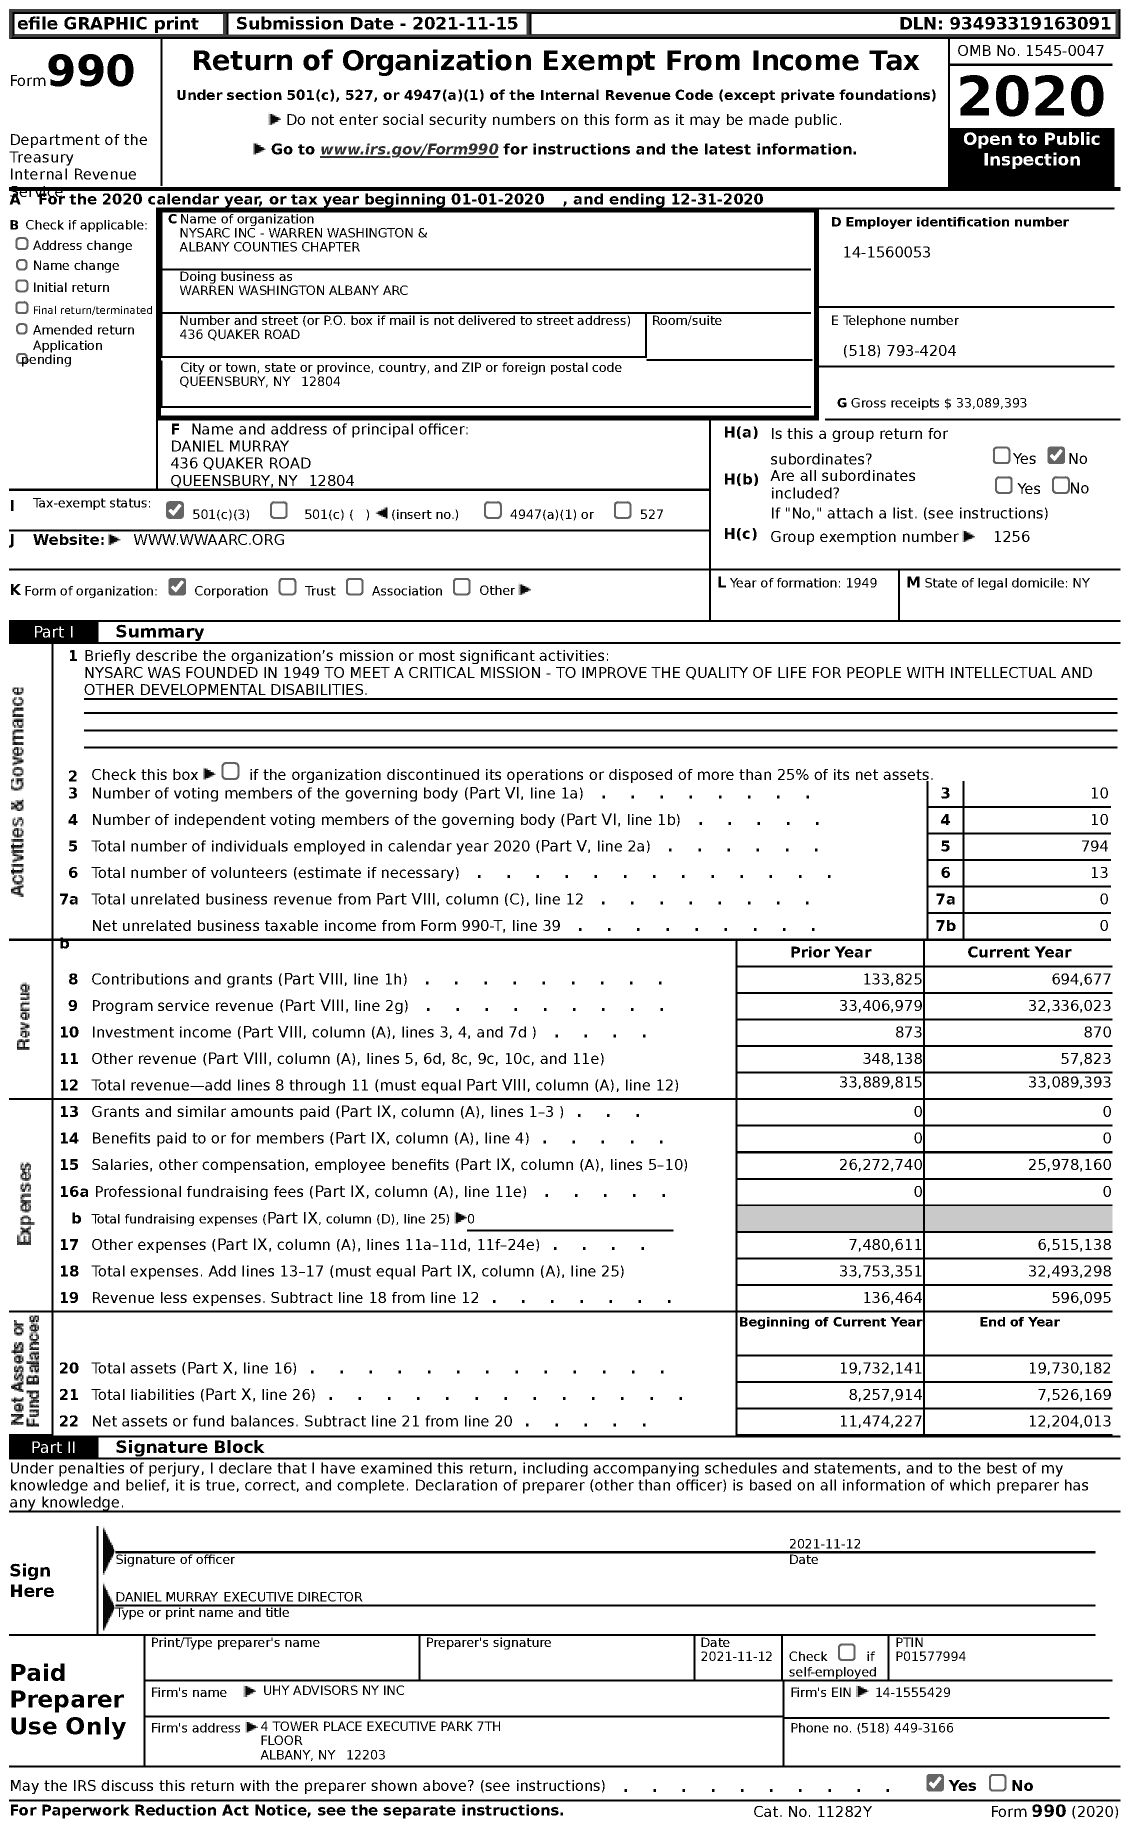 Image of first page of 2020 Form 990 for Warren, Washington & Albany Counties Chapter of NYSARC (WWAARC)